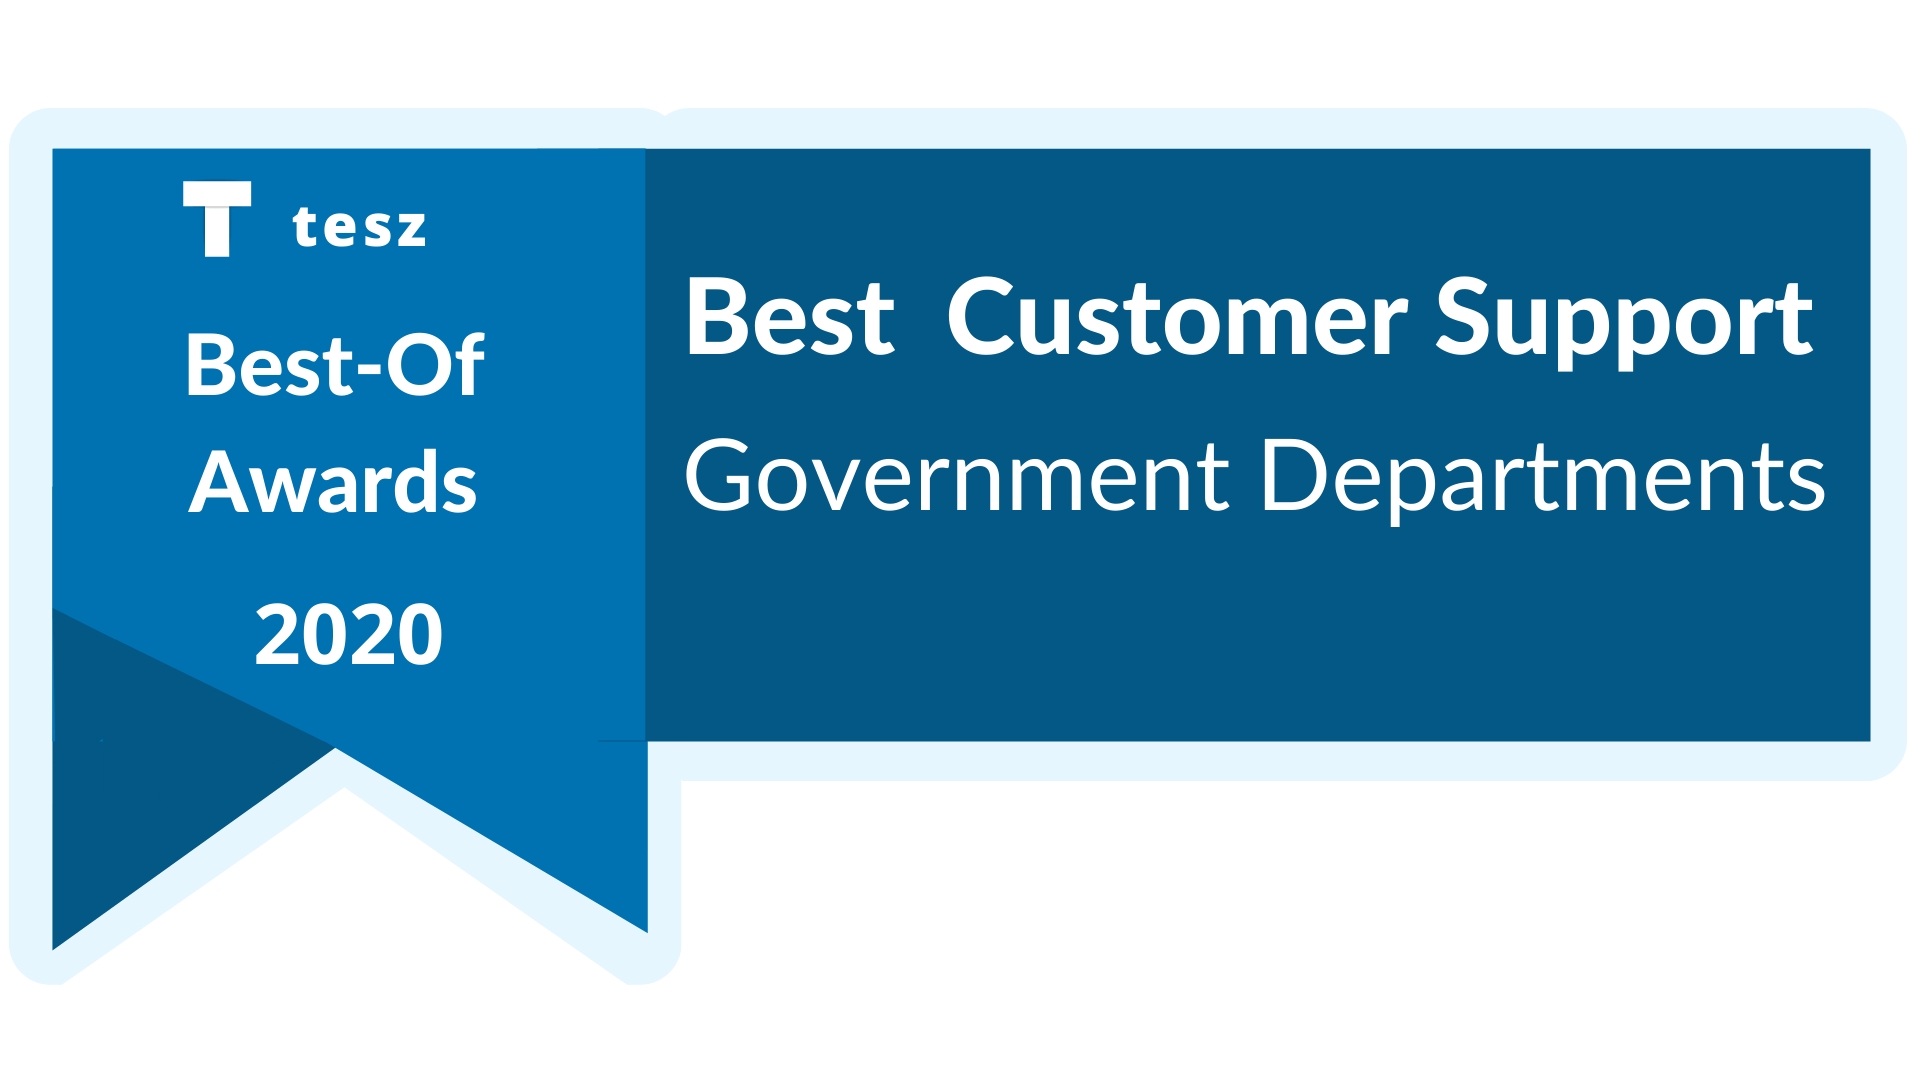 Best Government Department Providing Good Customer Support